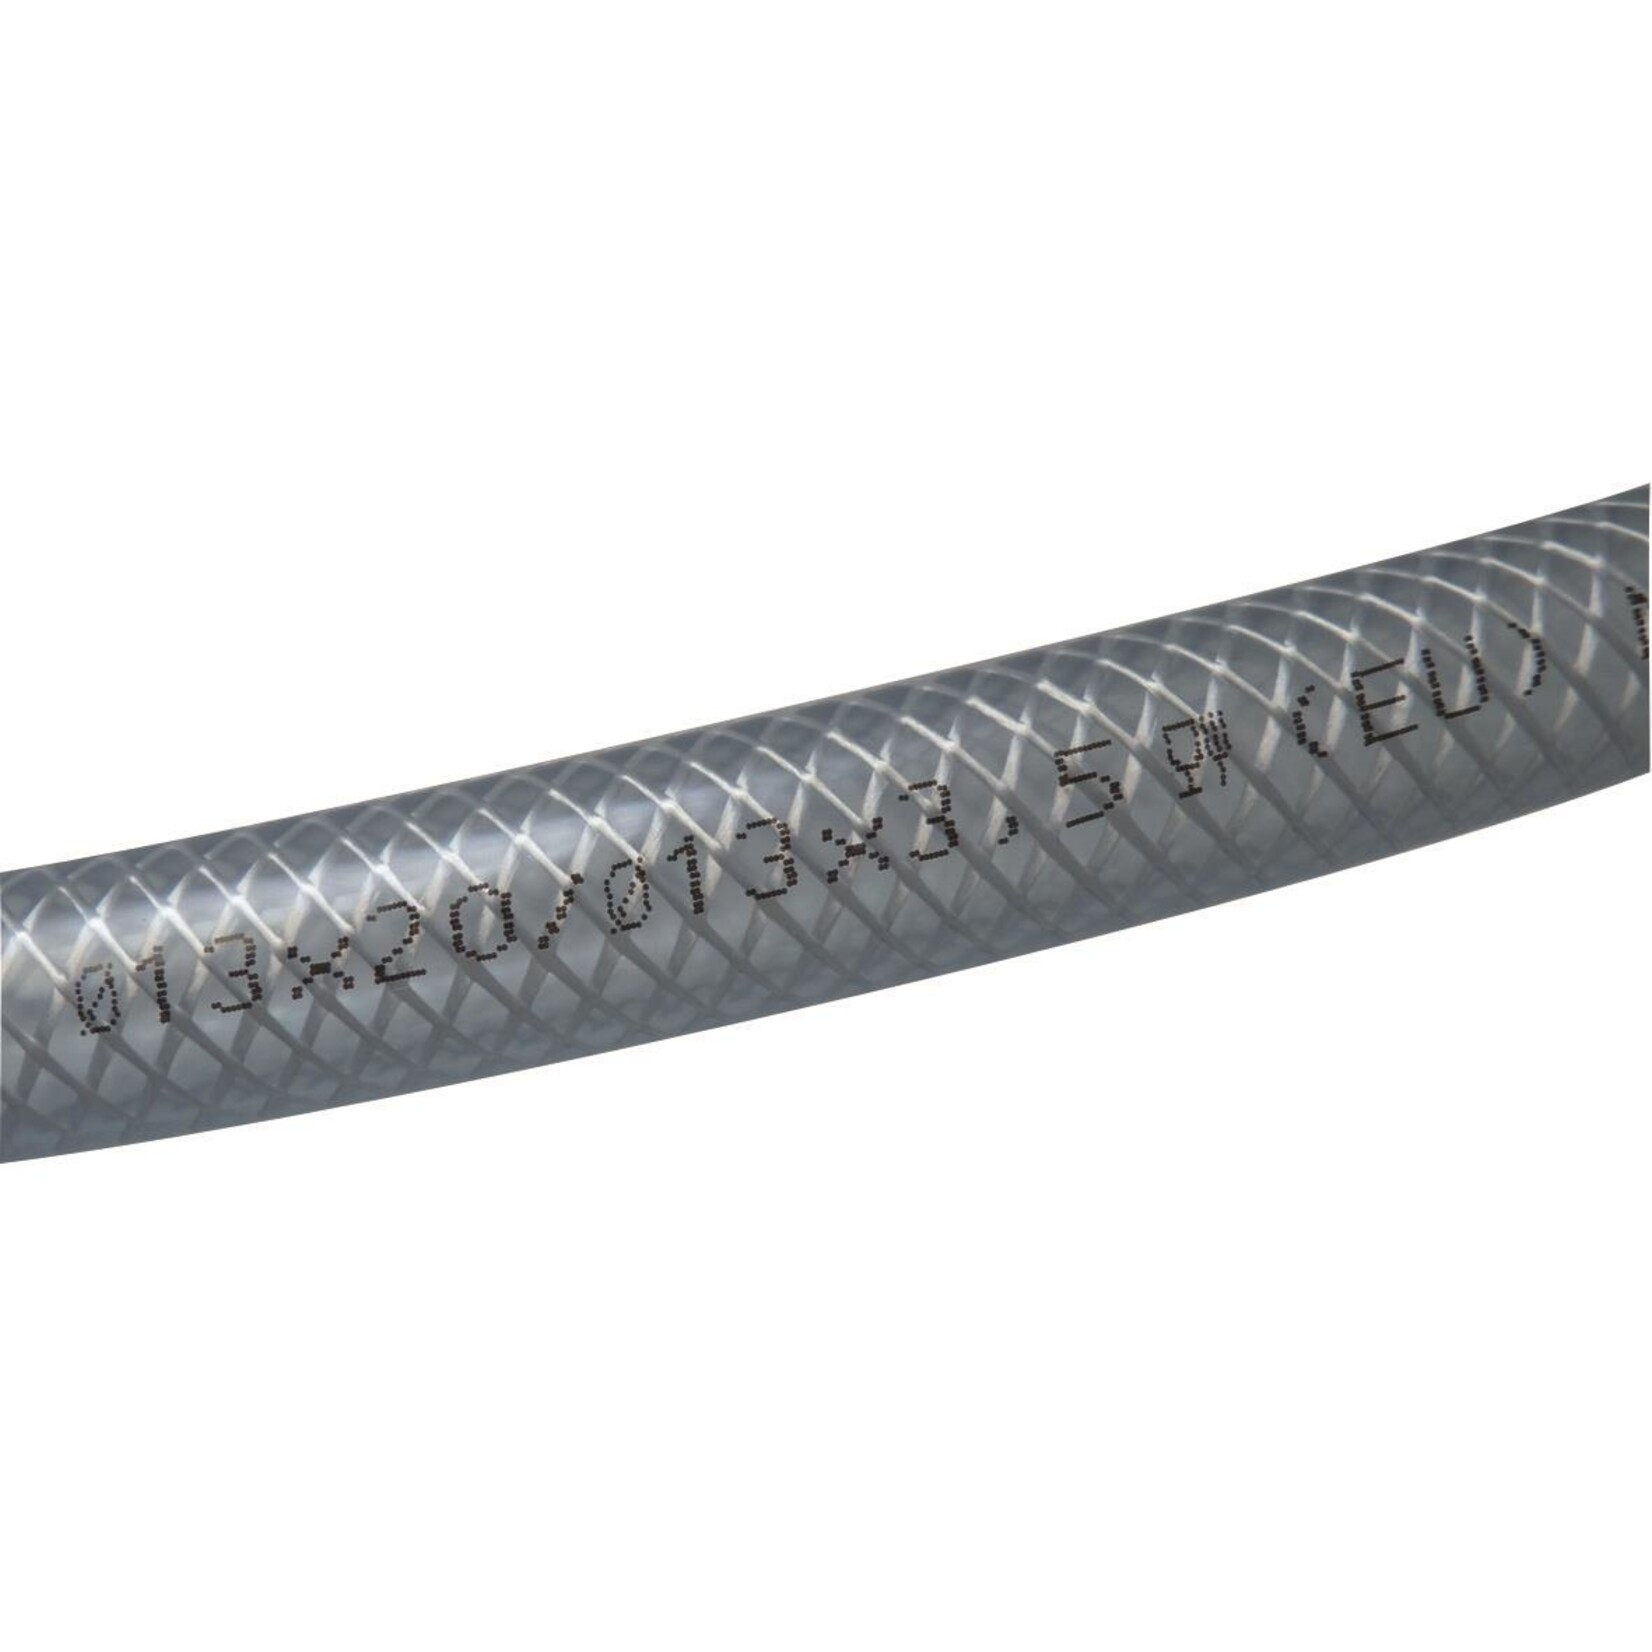 Plastimo D.25x33 fitted crystal hose